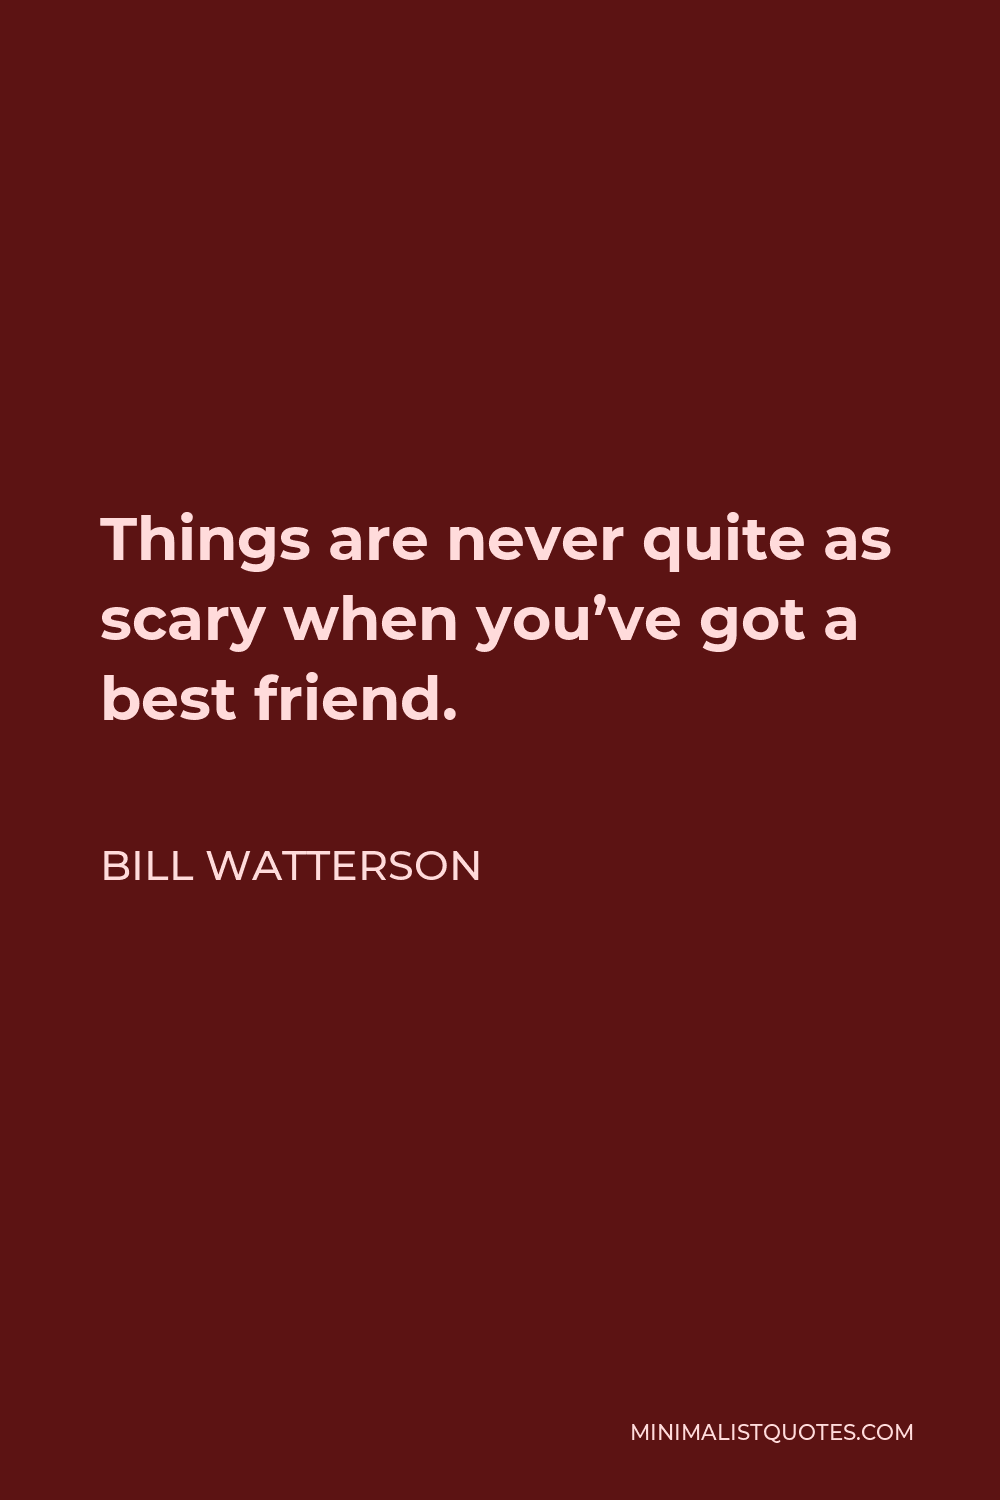 Bill Watterson Quote - Things are never quite as scary when you’ve got a best friend.